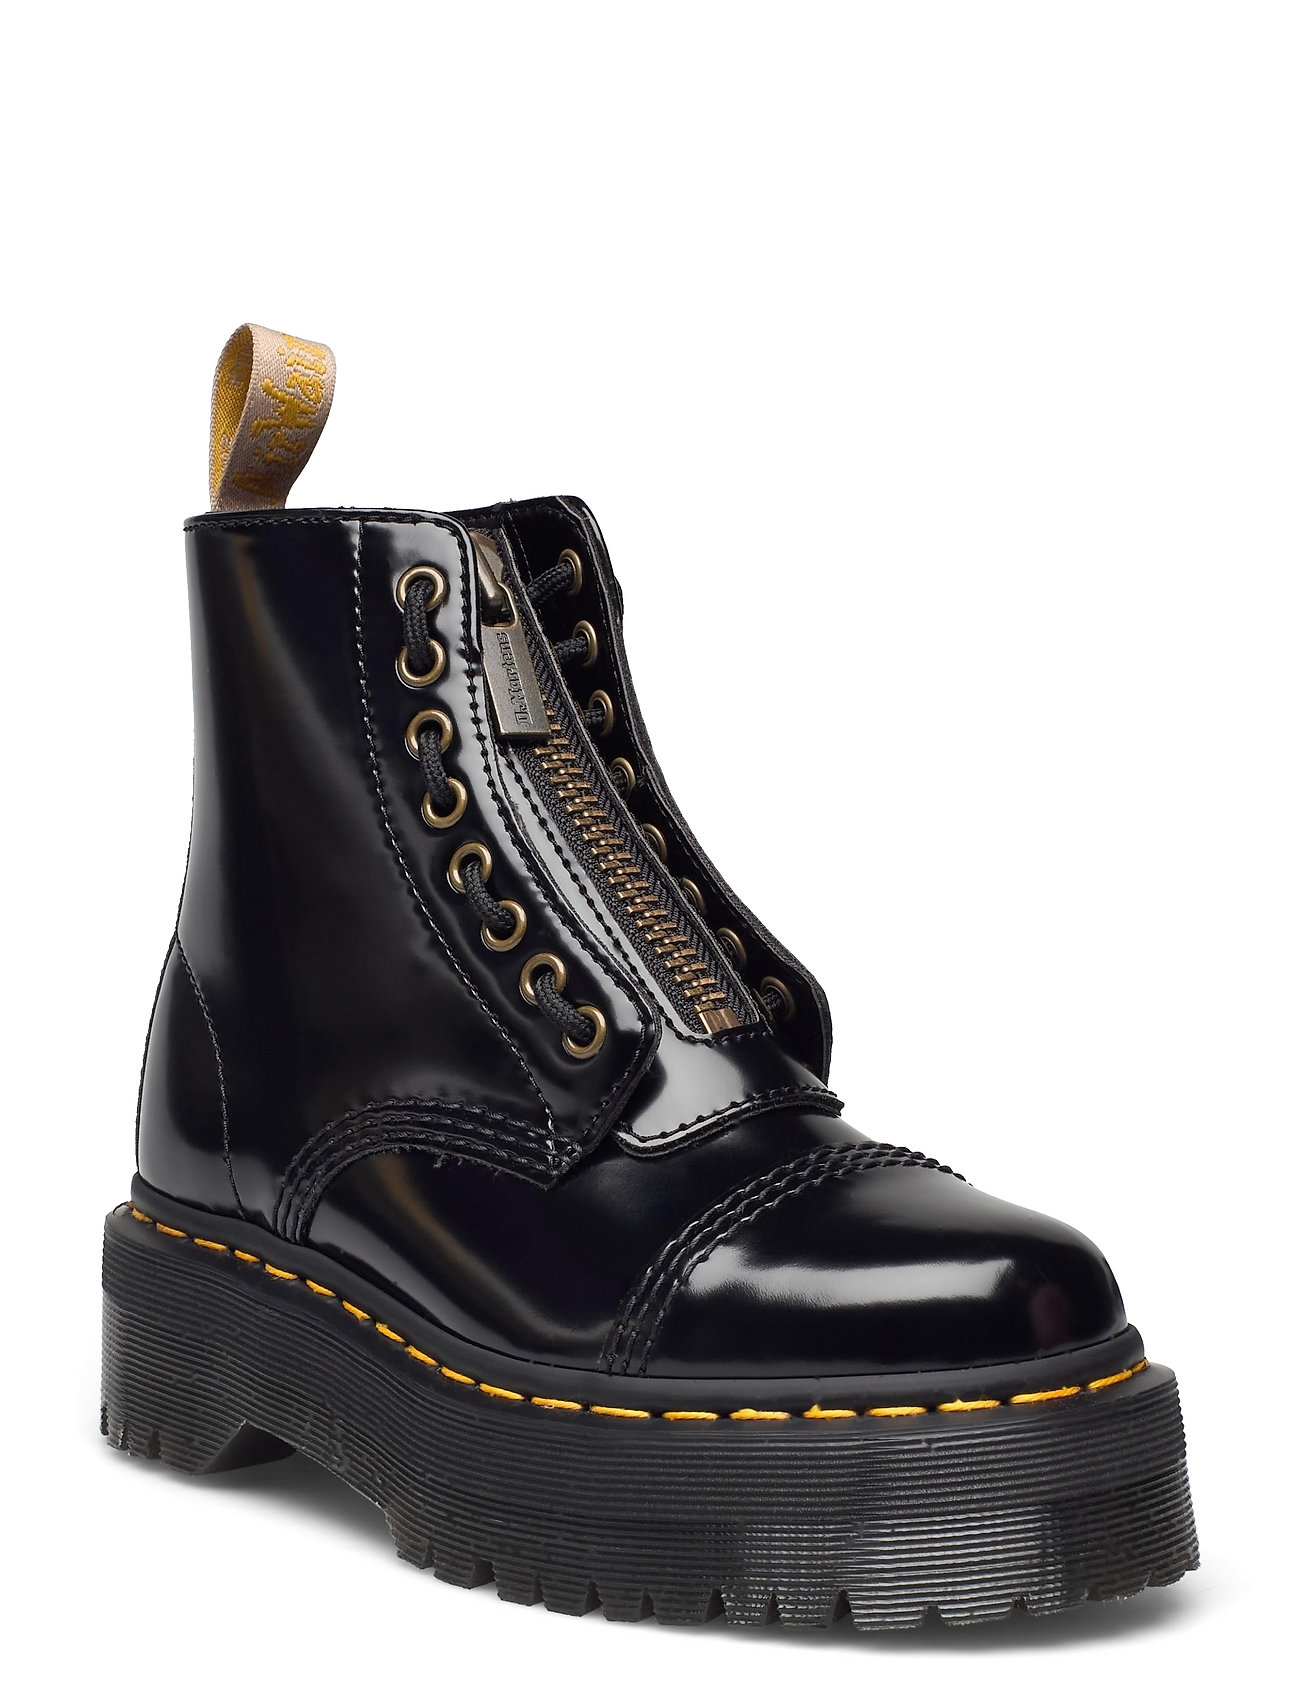 Vegan Sinclair Black Oxford Shoes Boots Ankle Boots Ankle Boot - Flat Musta Dr. Martens